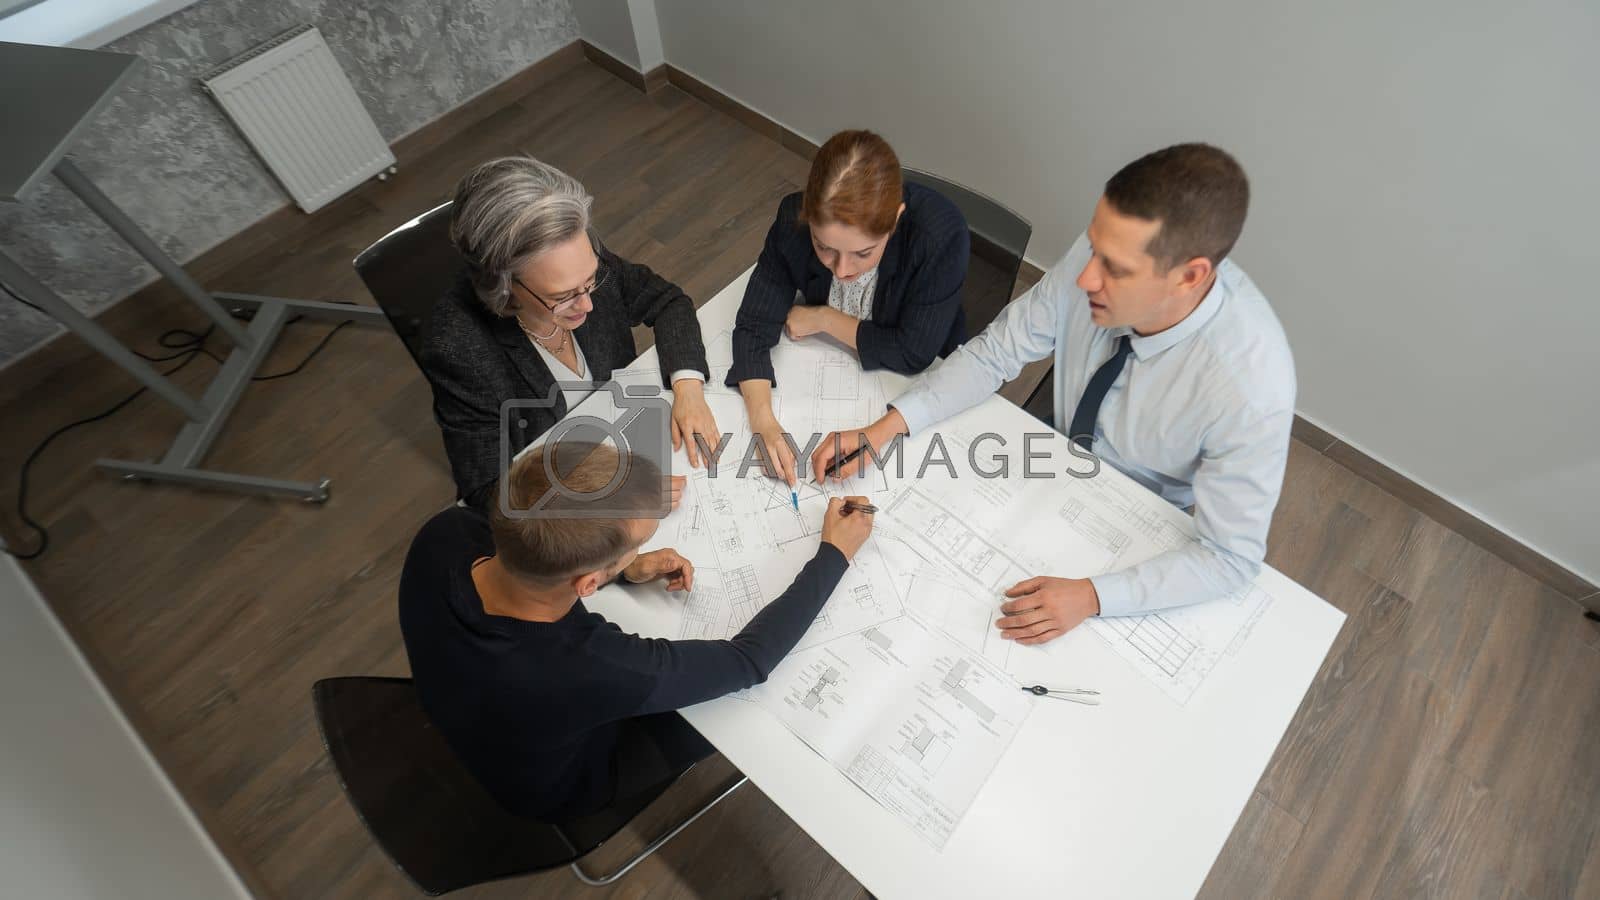 Royalty free image of Top view of 4 business people sitting at a table and discussing blueprints. Designers engineers at a meeting. by mrwed54